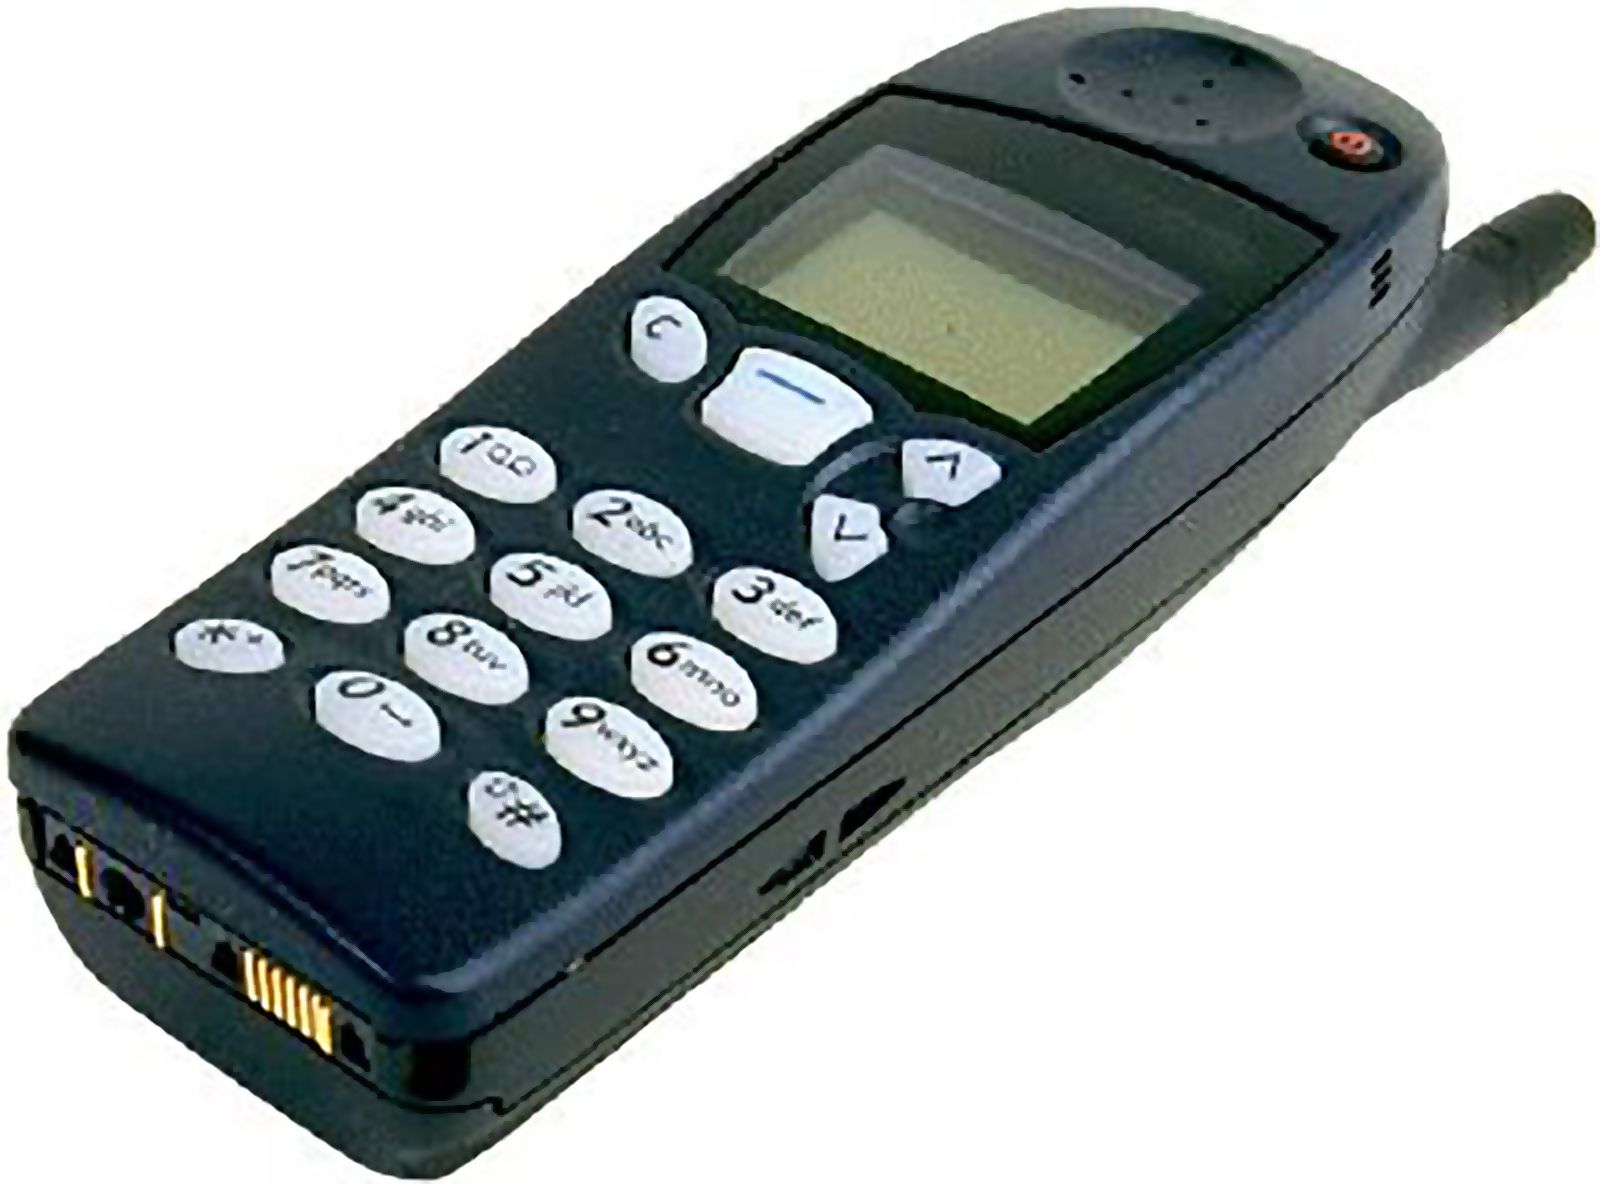 nokia through the years the best and worst phones in pictures image 31